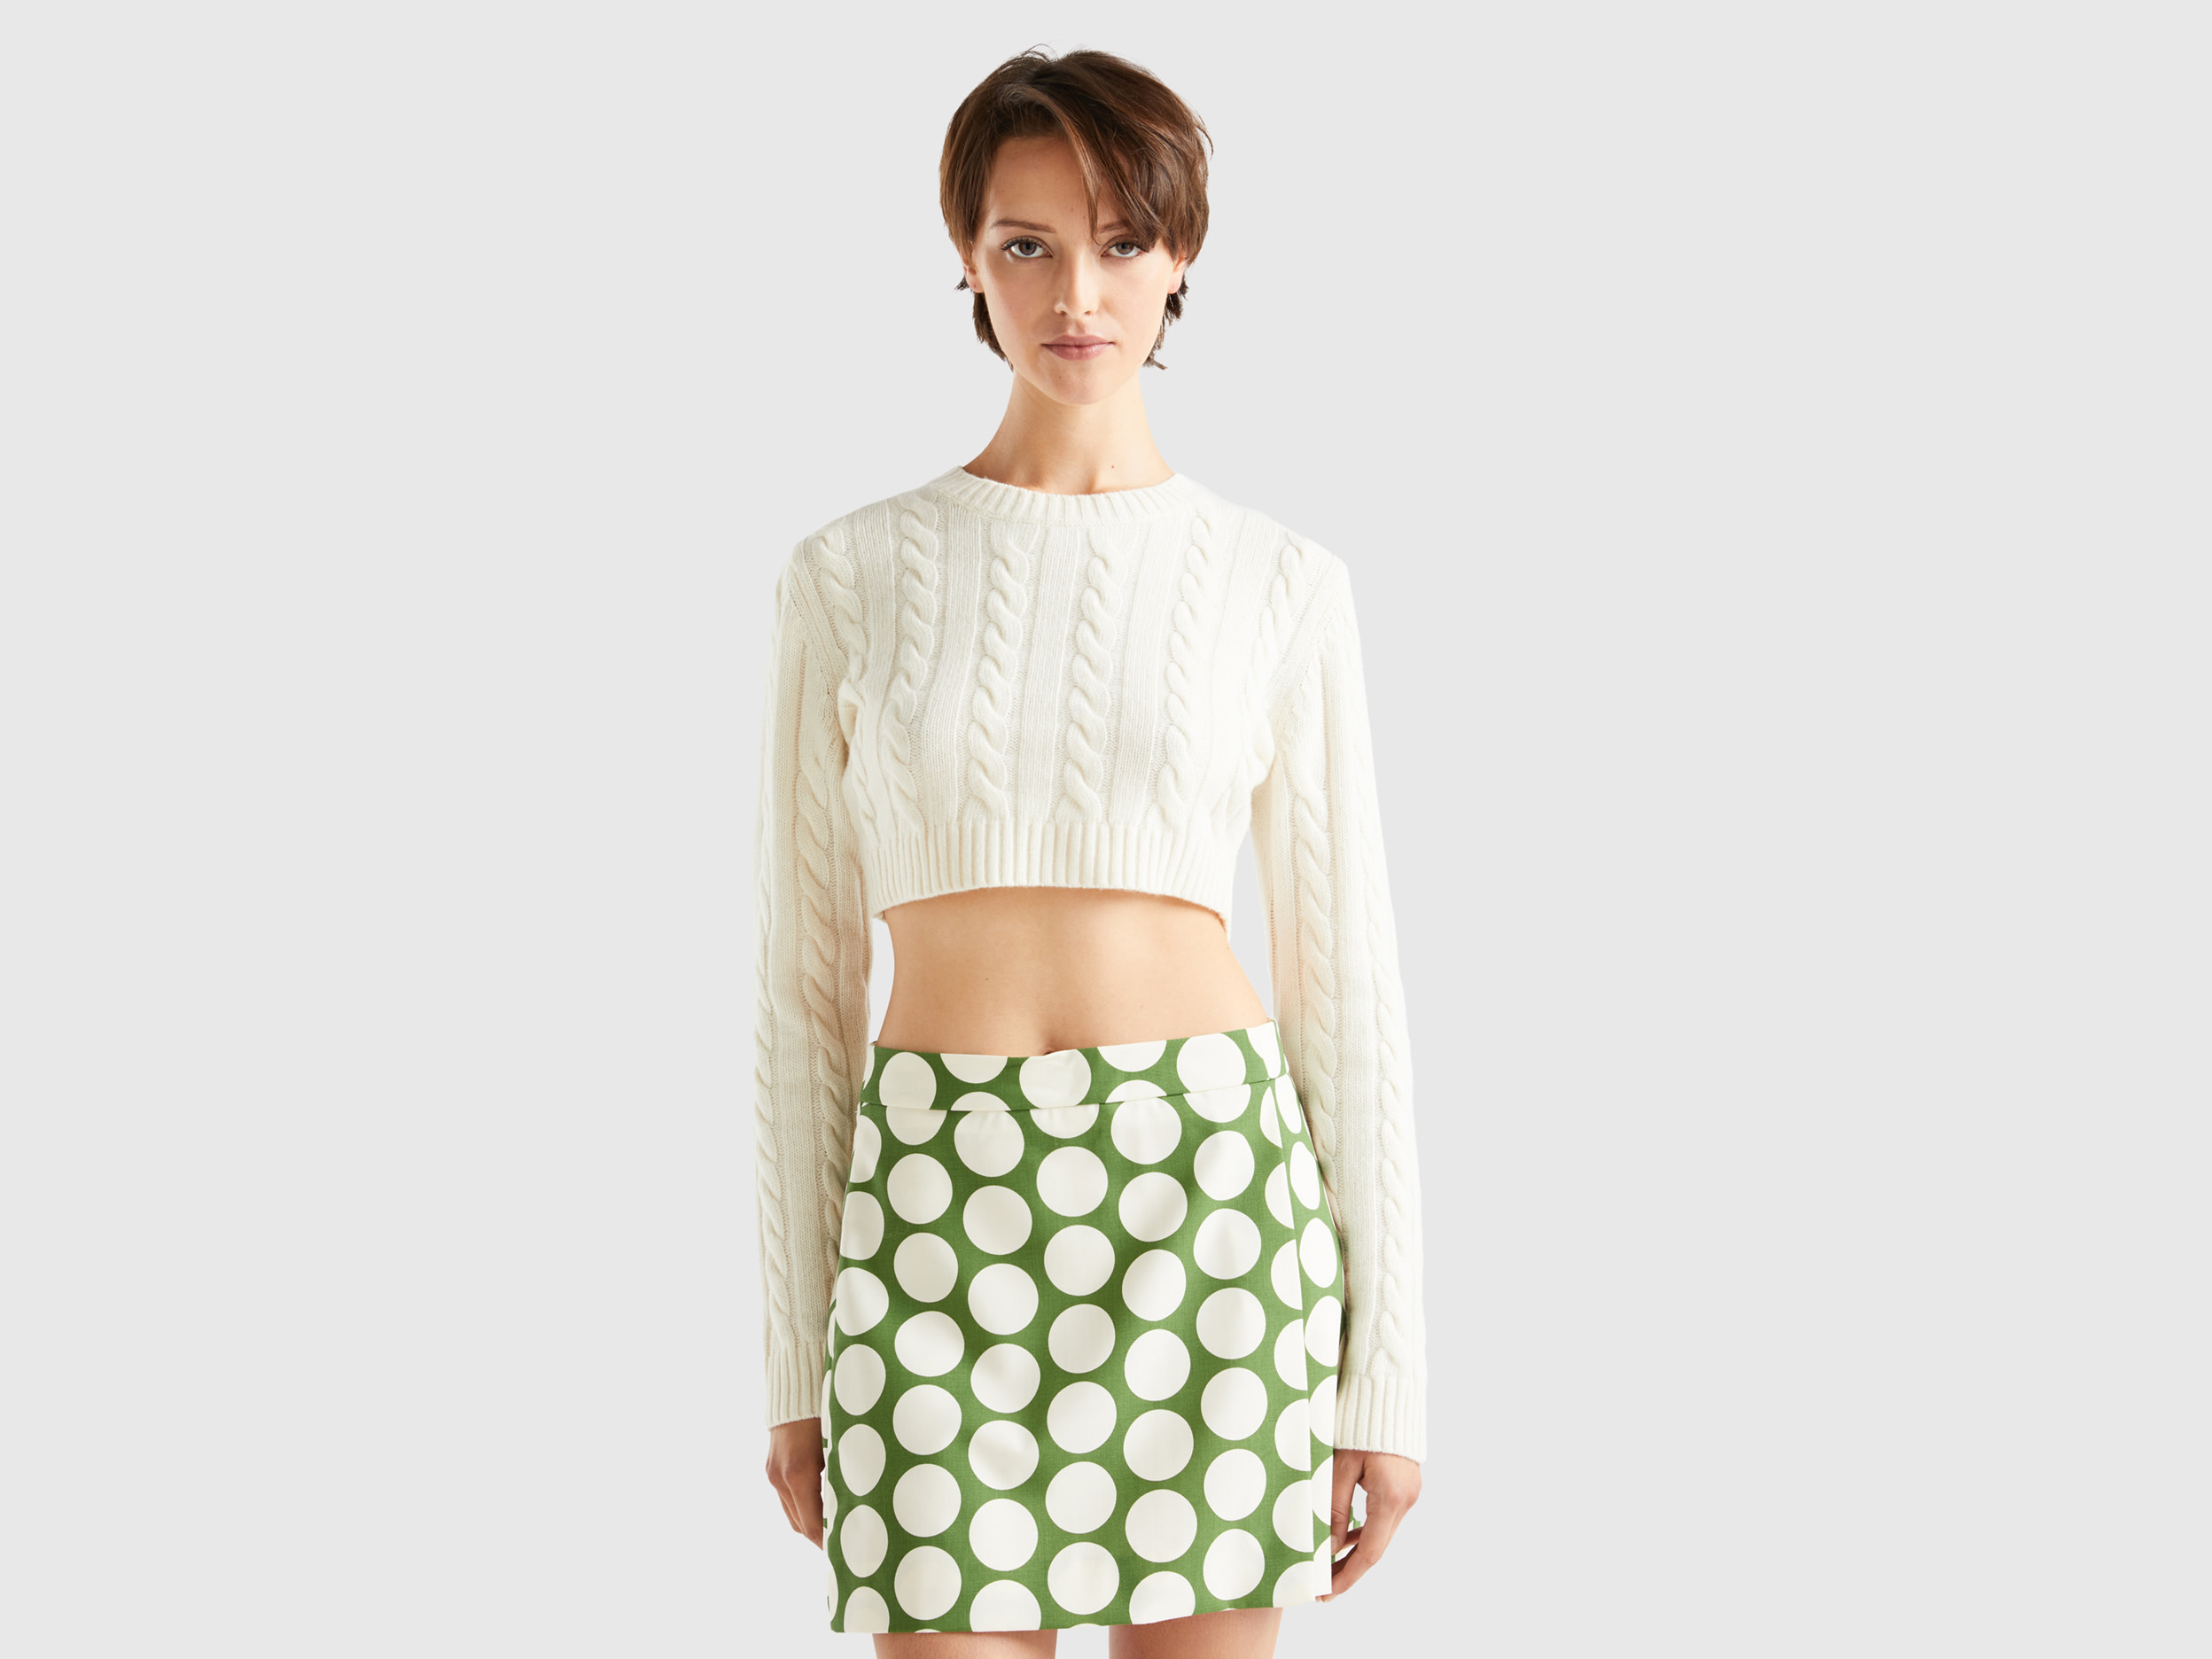 Benetton, Cropped Sweater With Cables, size XL, White, Women